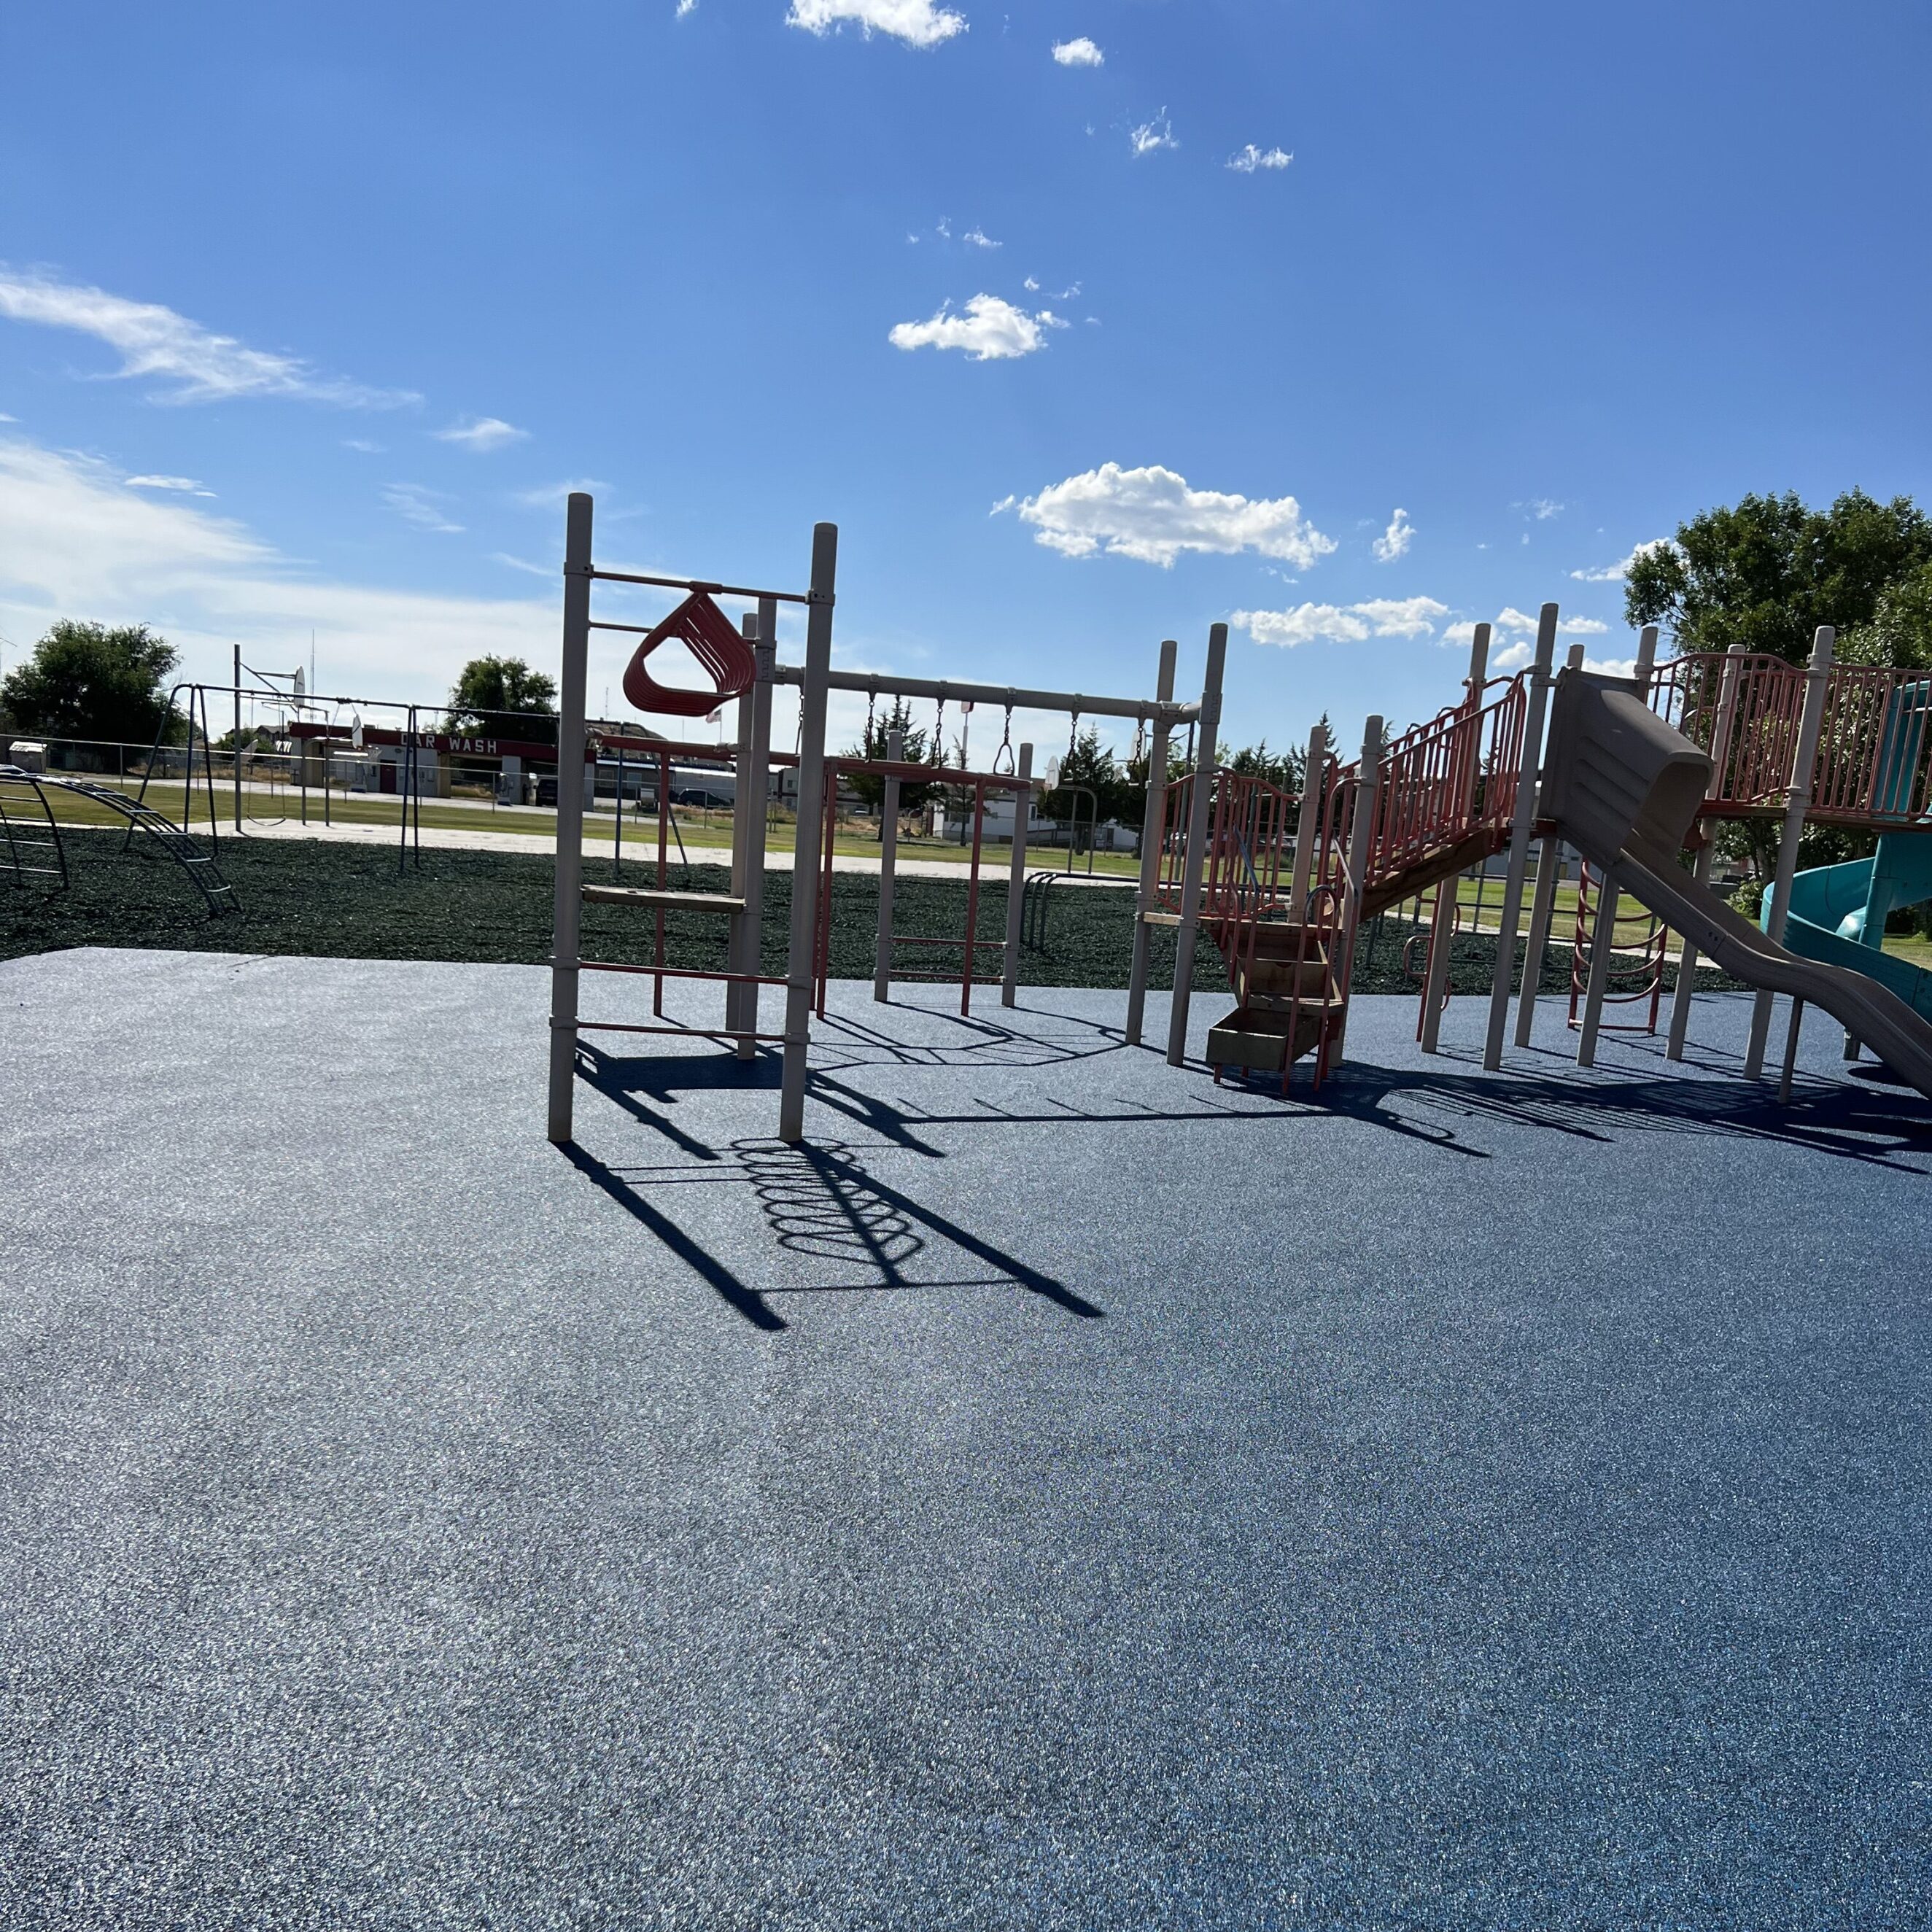 Playground equipment on a sunny day